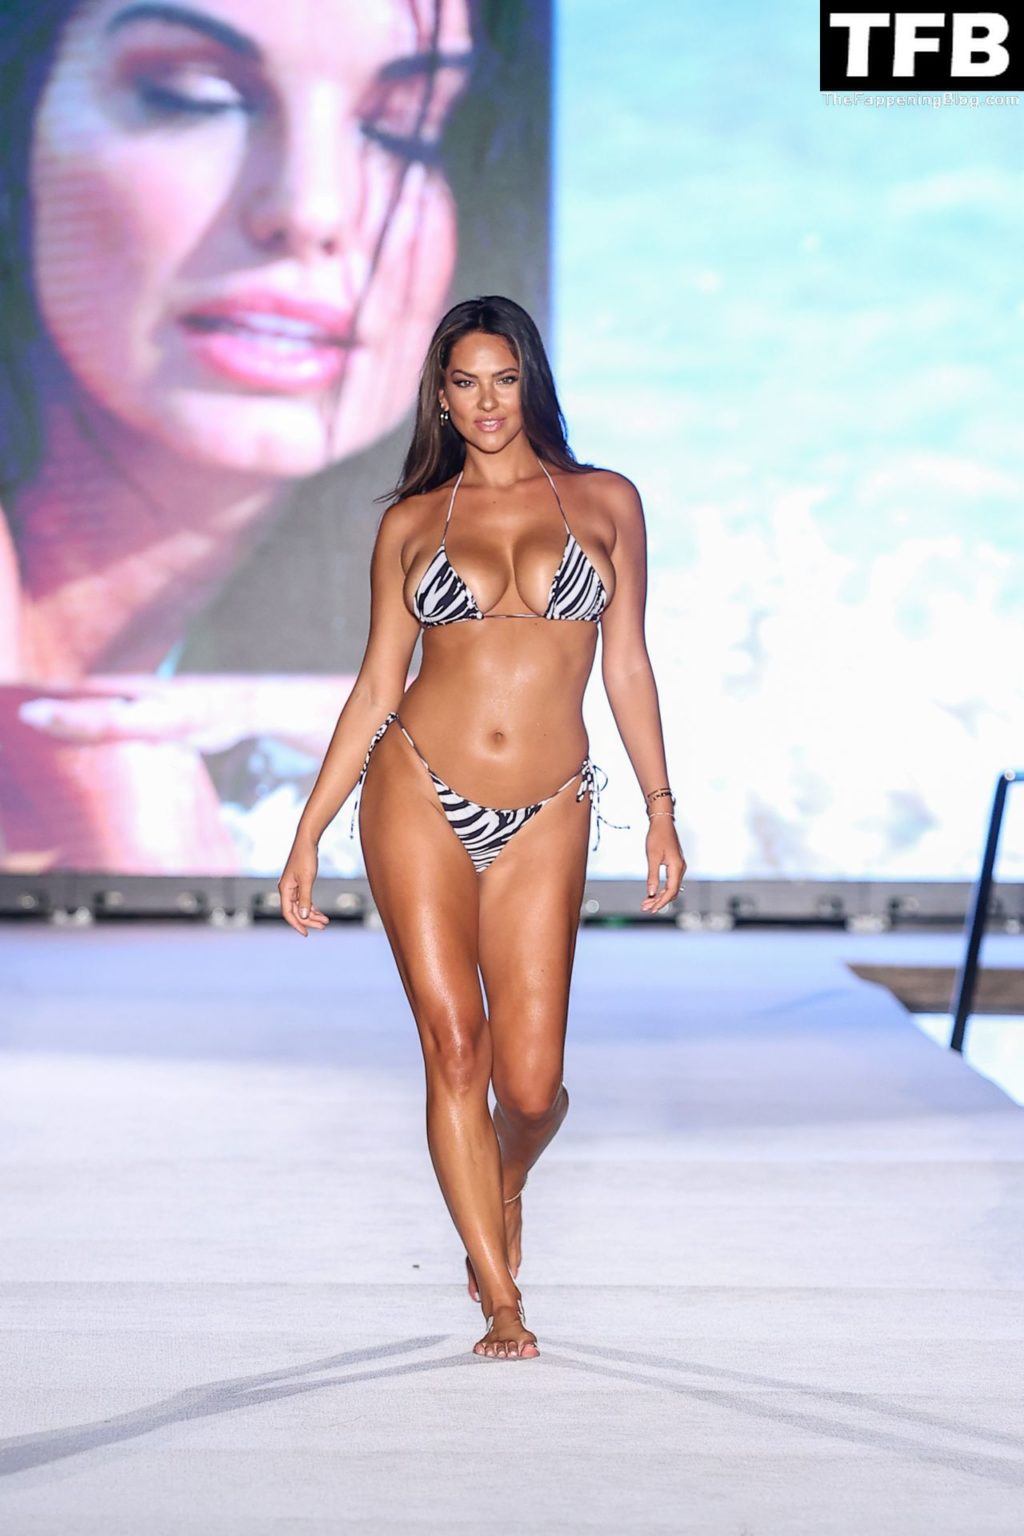 Christen Harper Flaunts Her Big Tits at the Sports Illustrated Swimsuit Runway Show (8 Photos)